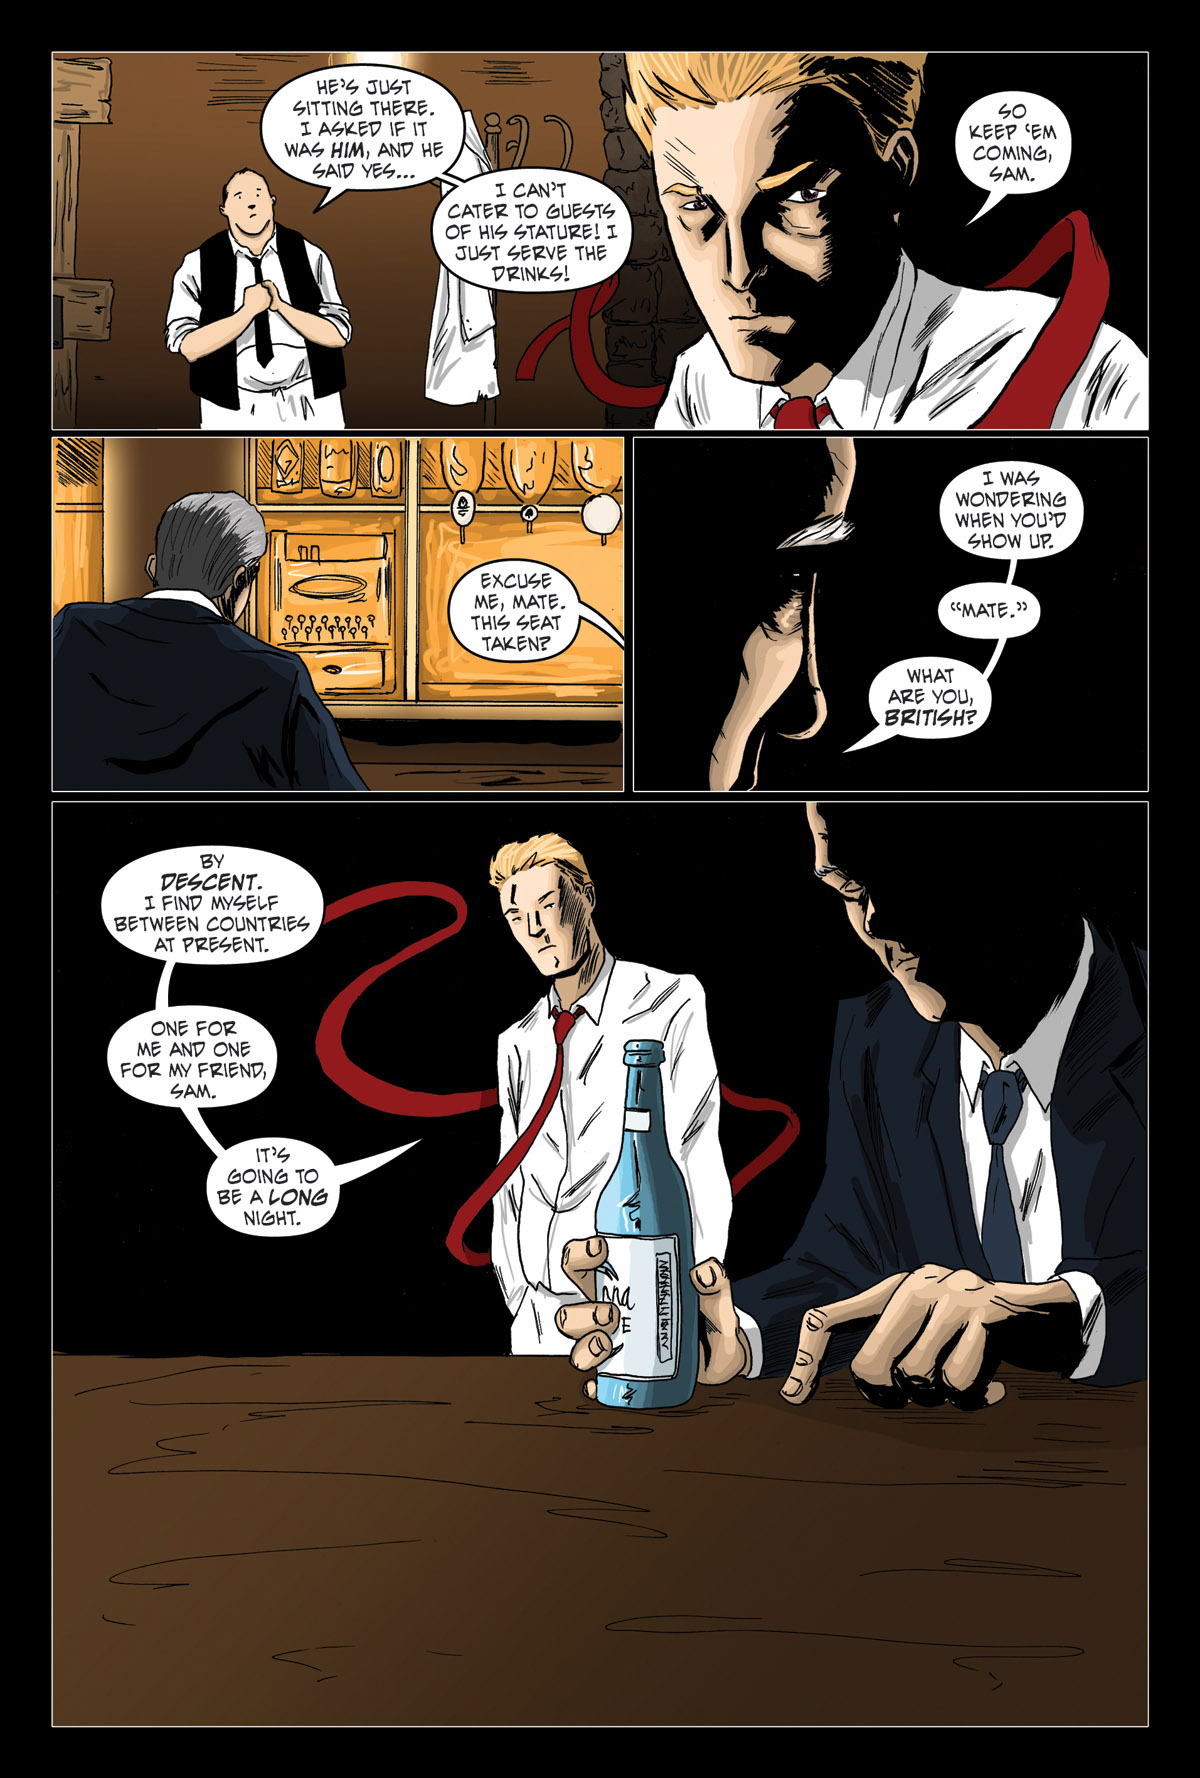 Afterlife Inc. | Death of a Salesman | Page 2